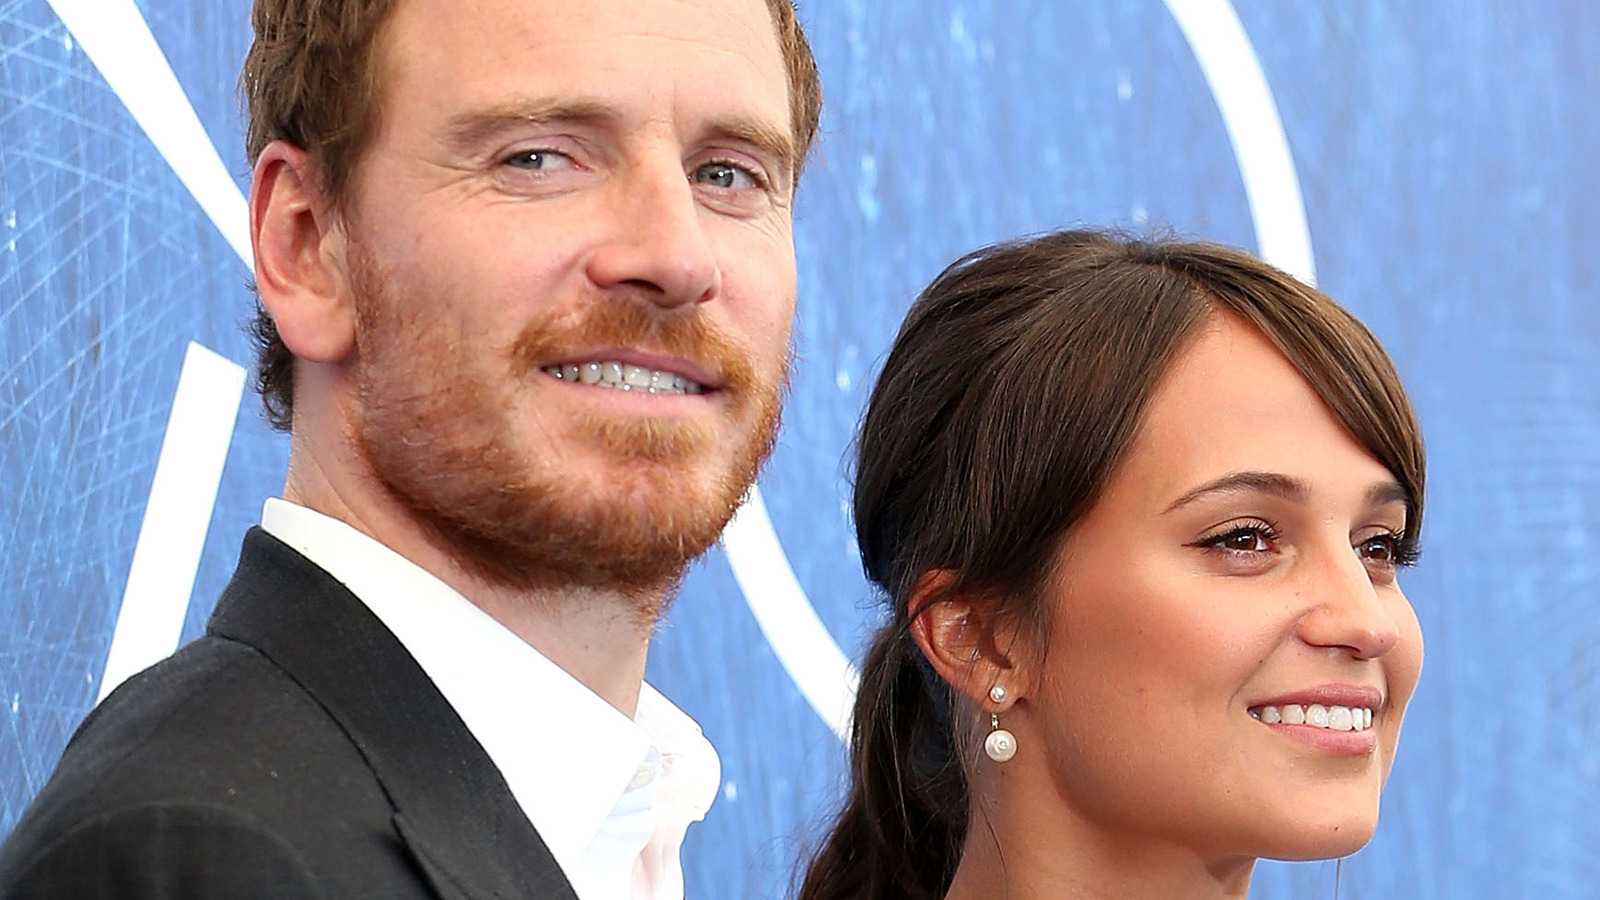 Michael Fassbender spotted with a baby while in Paris with Alicia